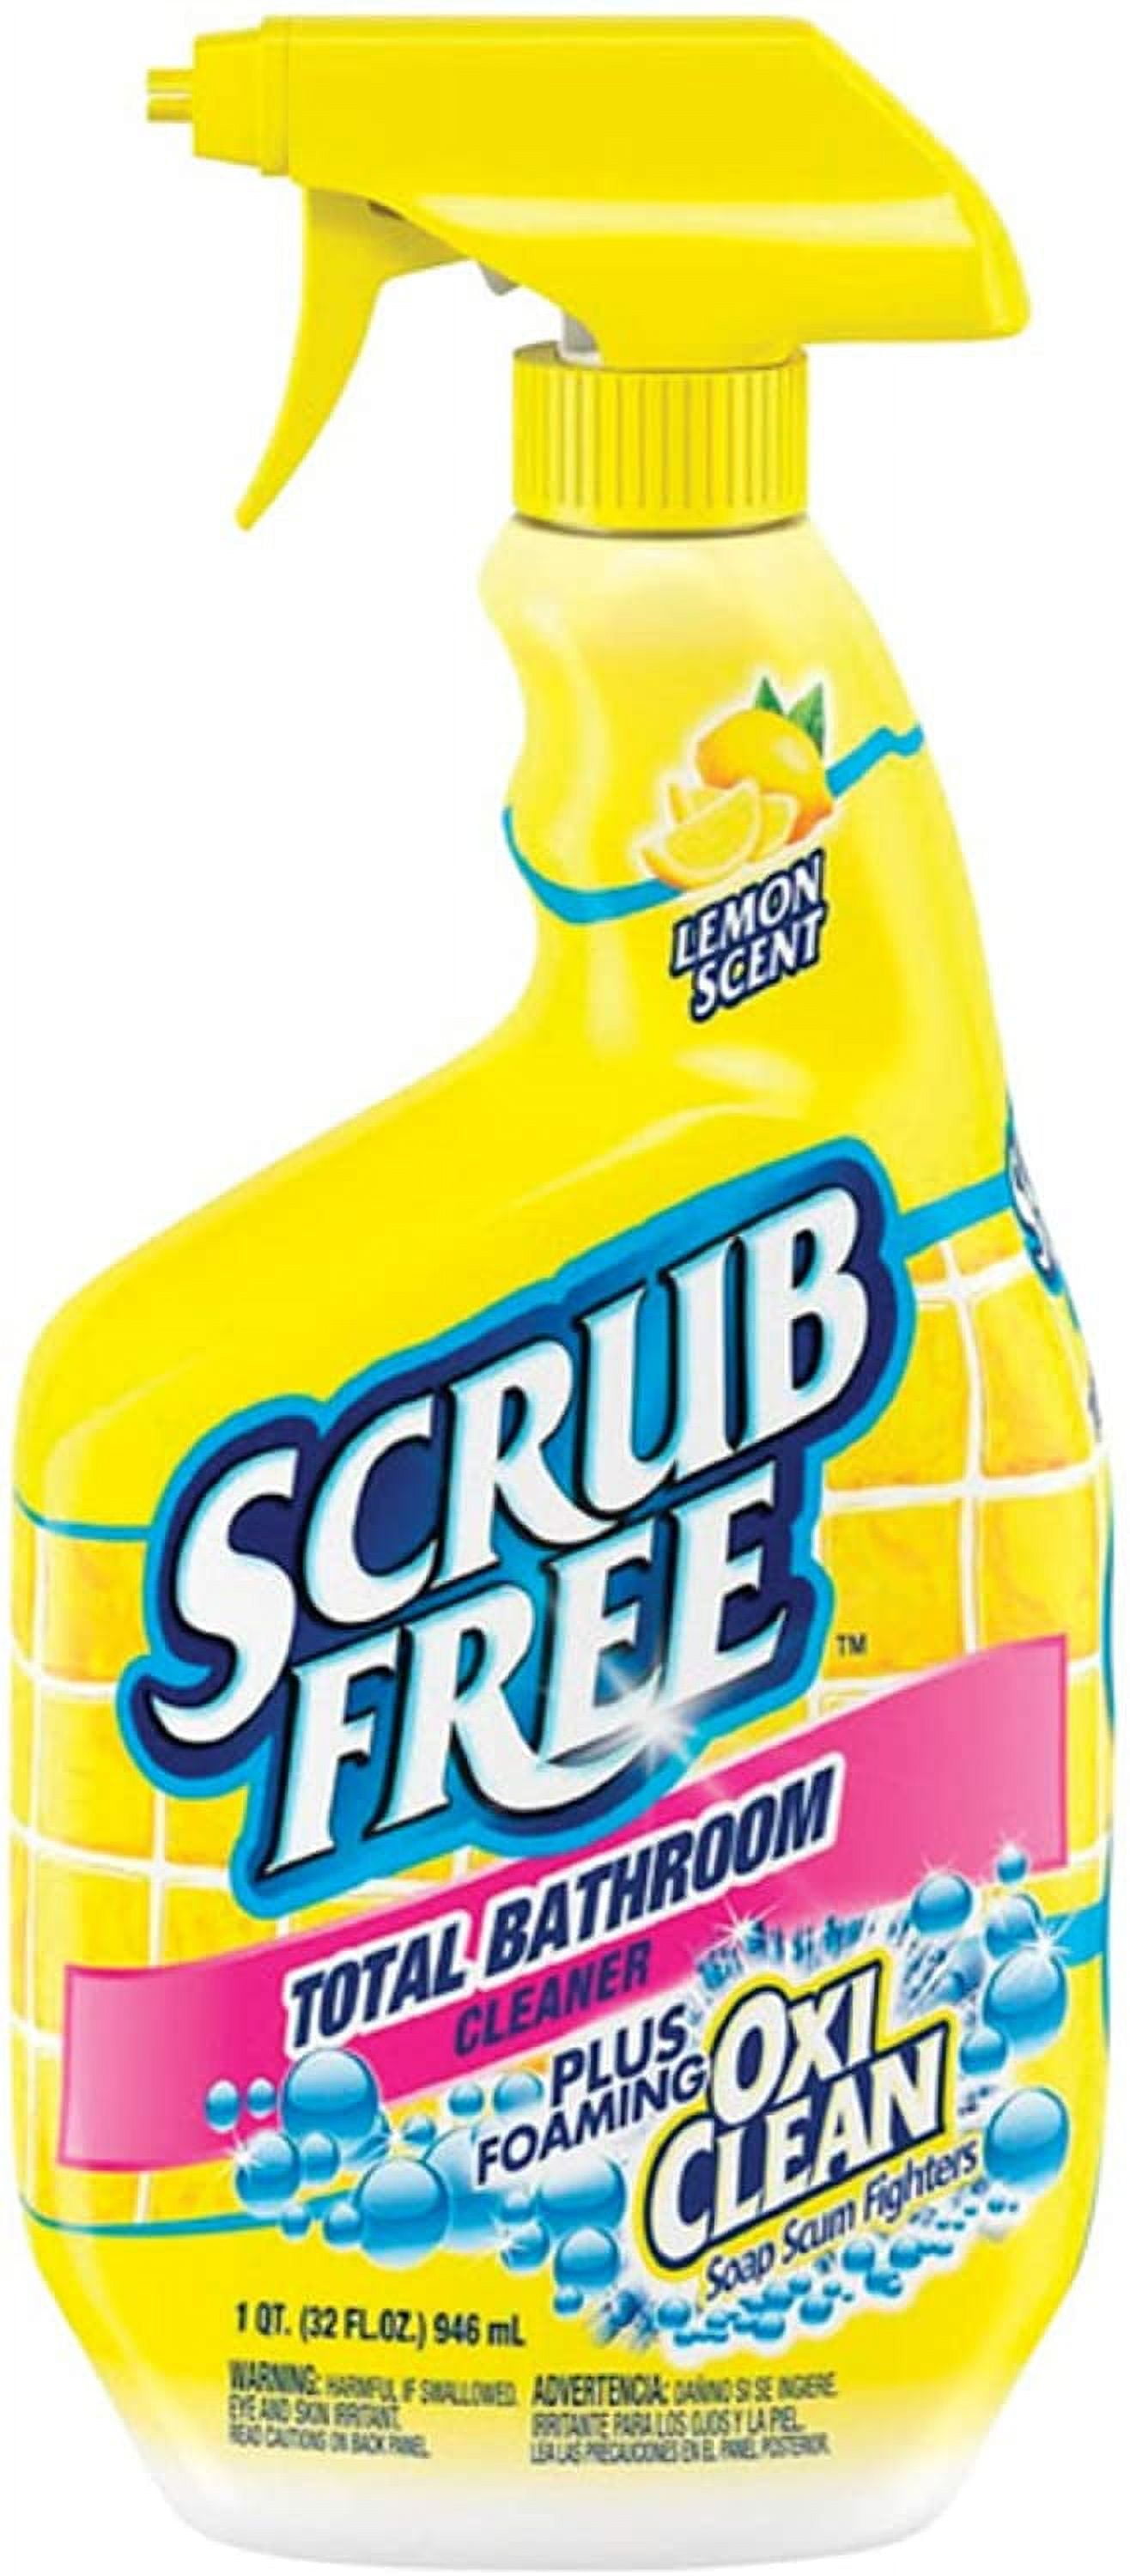 Scrub Free 33200-00105 Bathroom Cleaner with Oxi Clean, Lemon Scent, 32 fl.  oz. (Pack of 8): : Industrial & Scientific